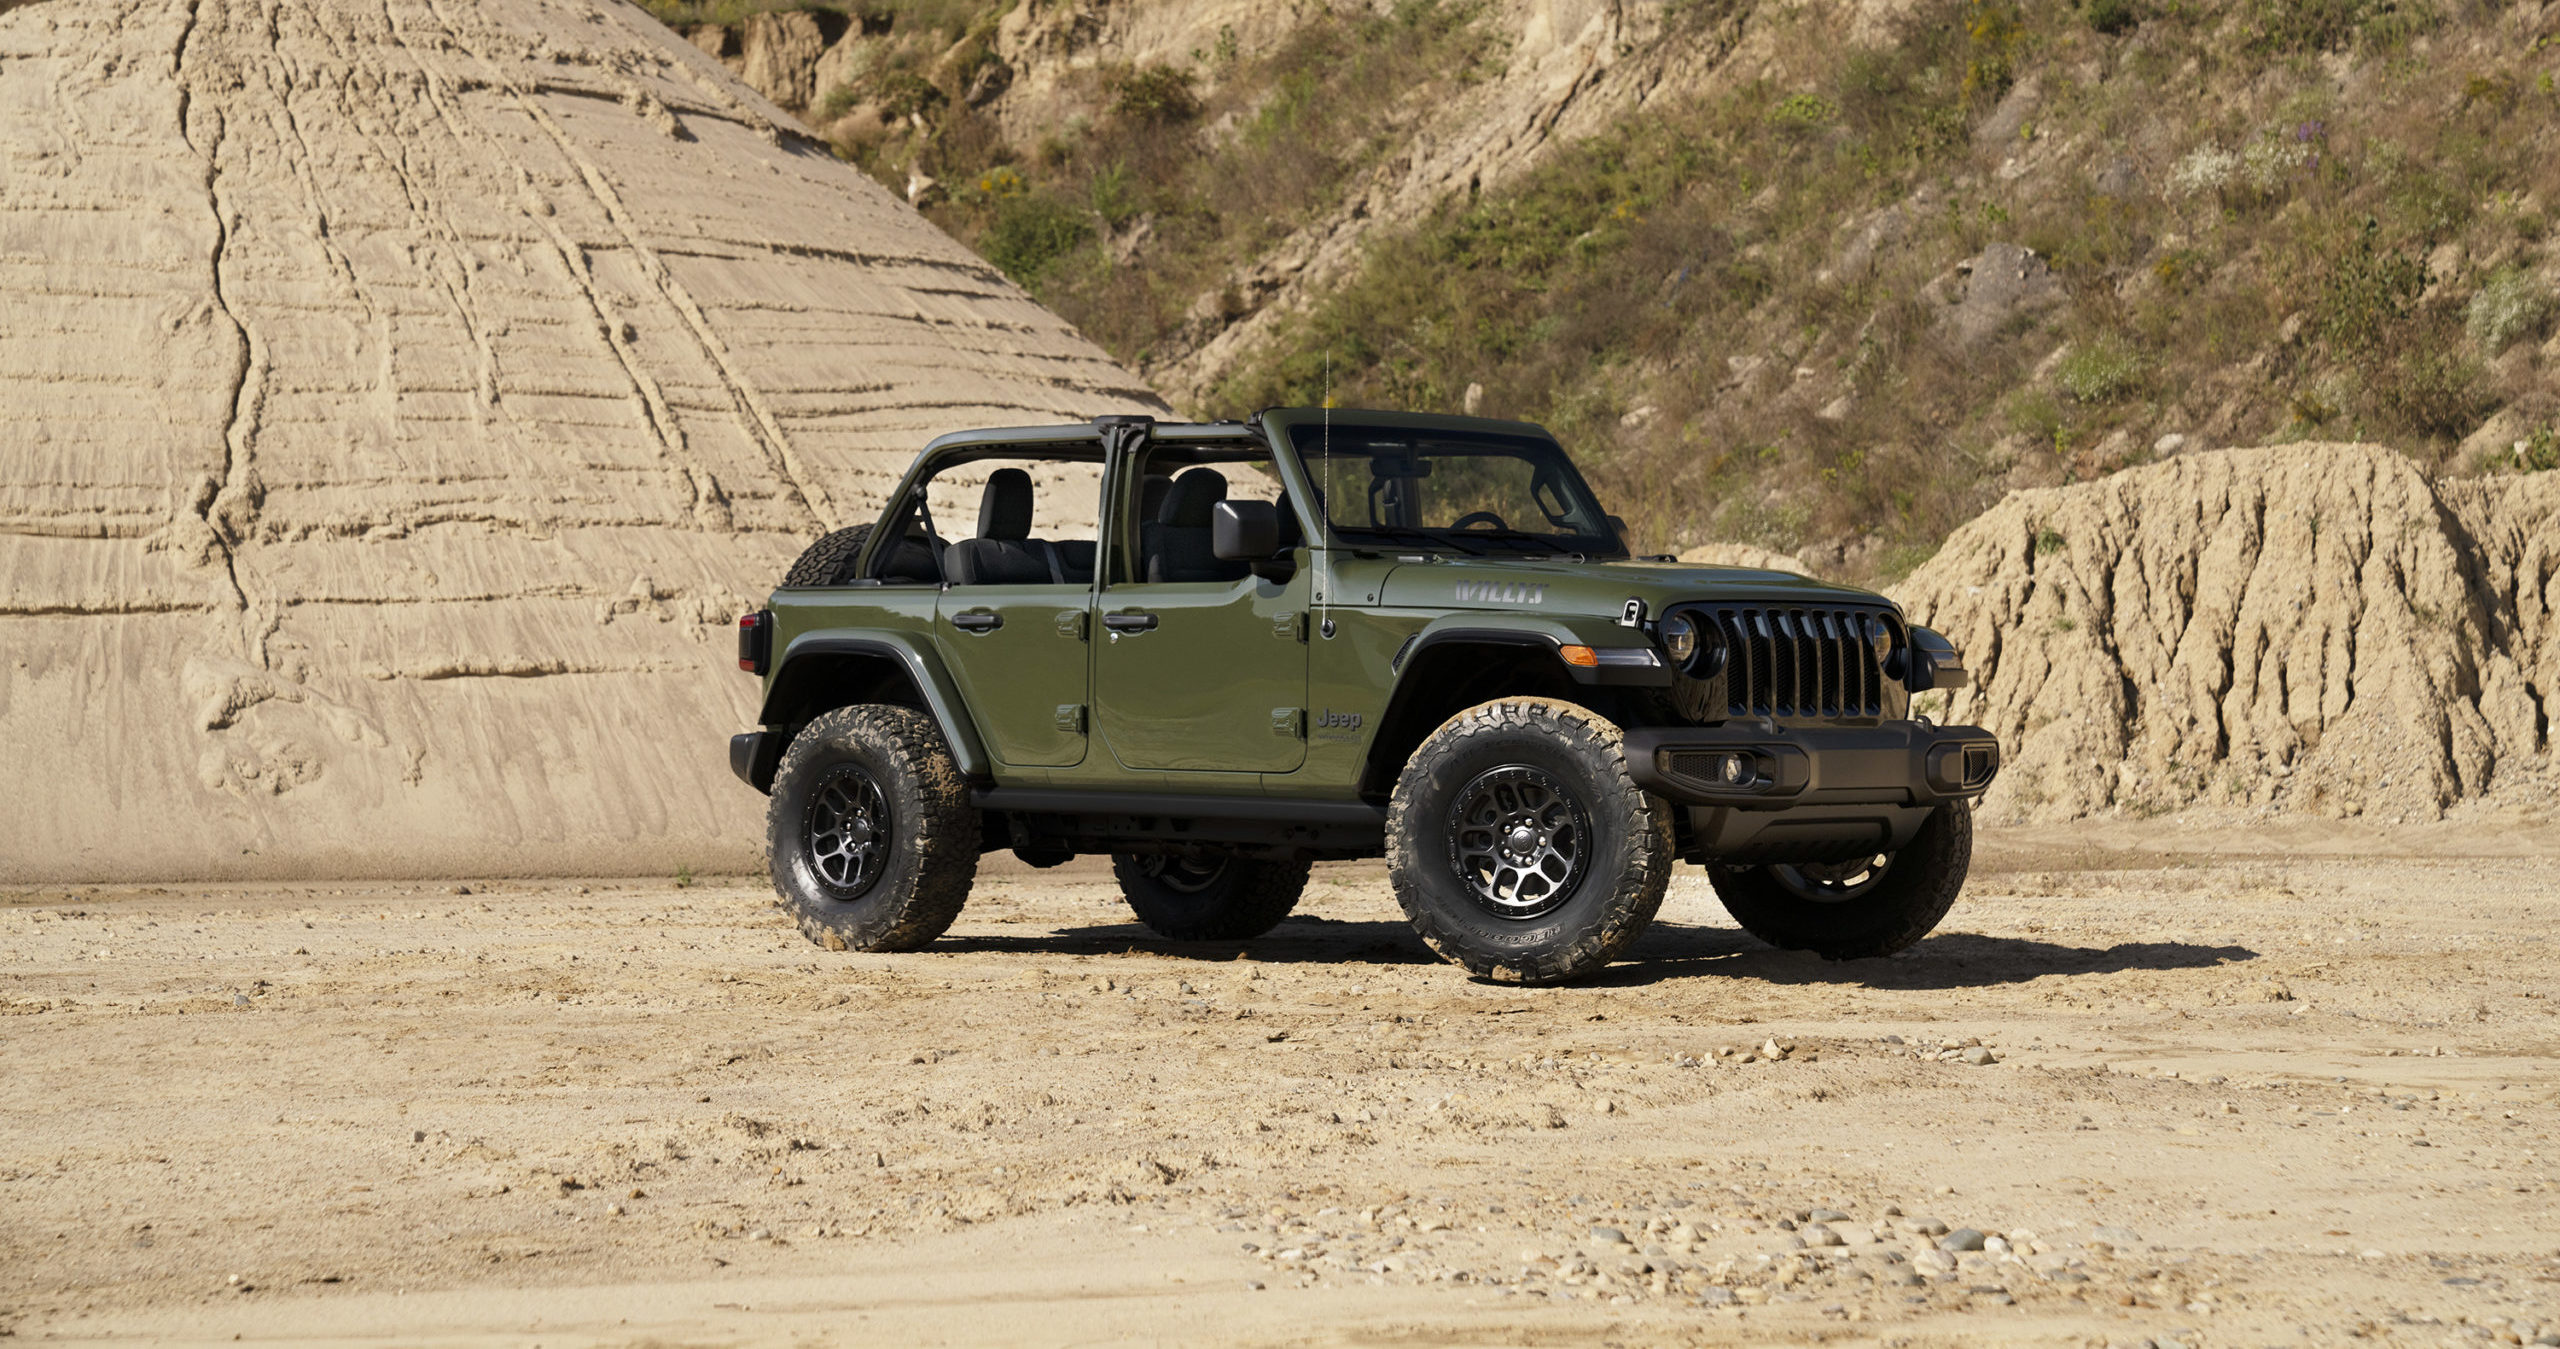 Jeep Now Offers The Wrangler Willys Xtreme Recon Package For Just Over  $40K: News - The Fast Lane Car